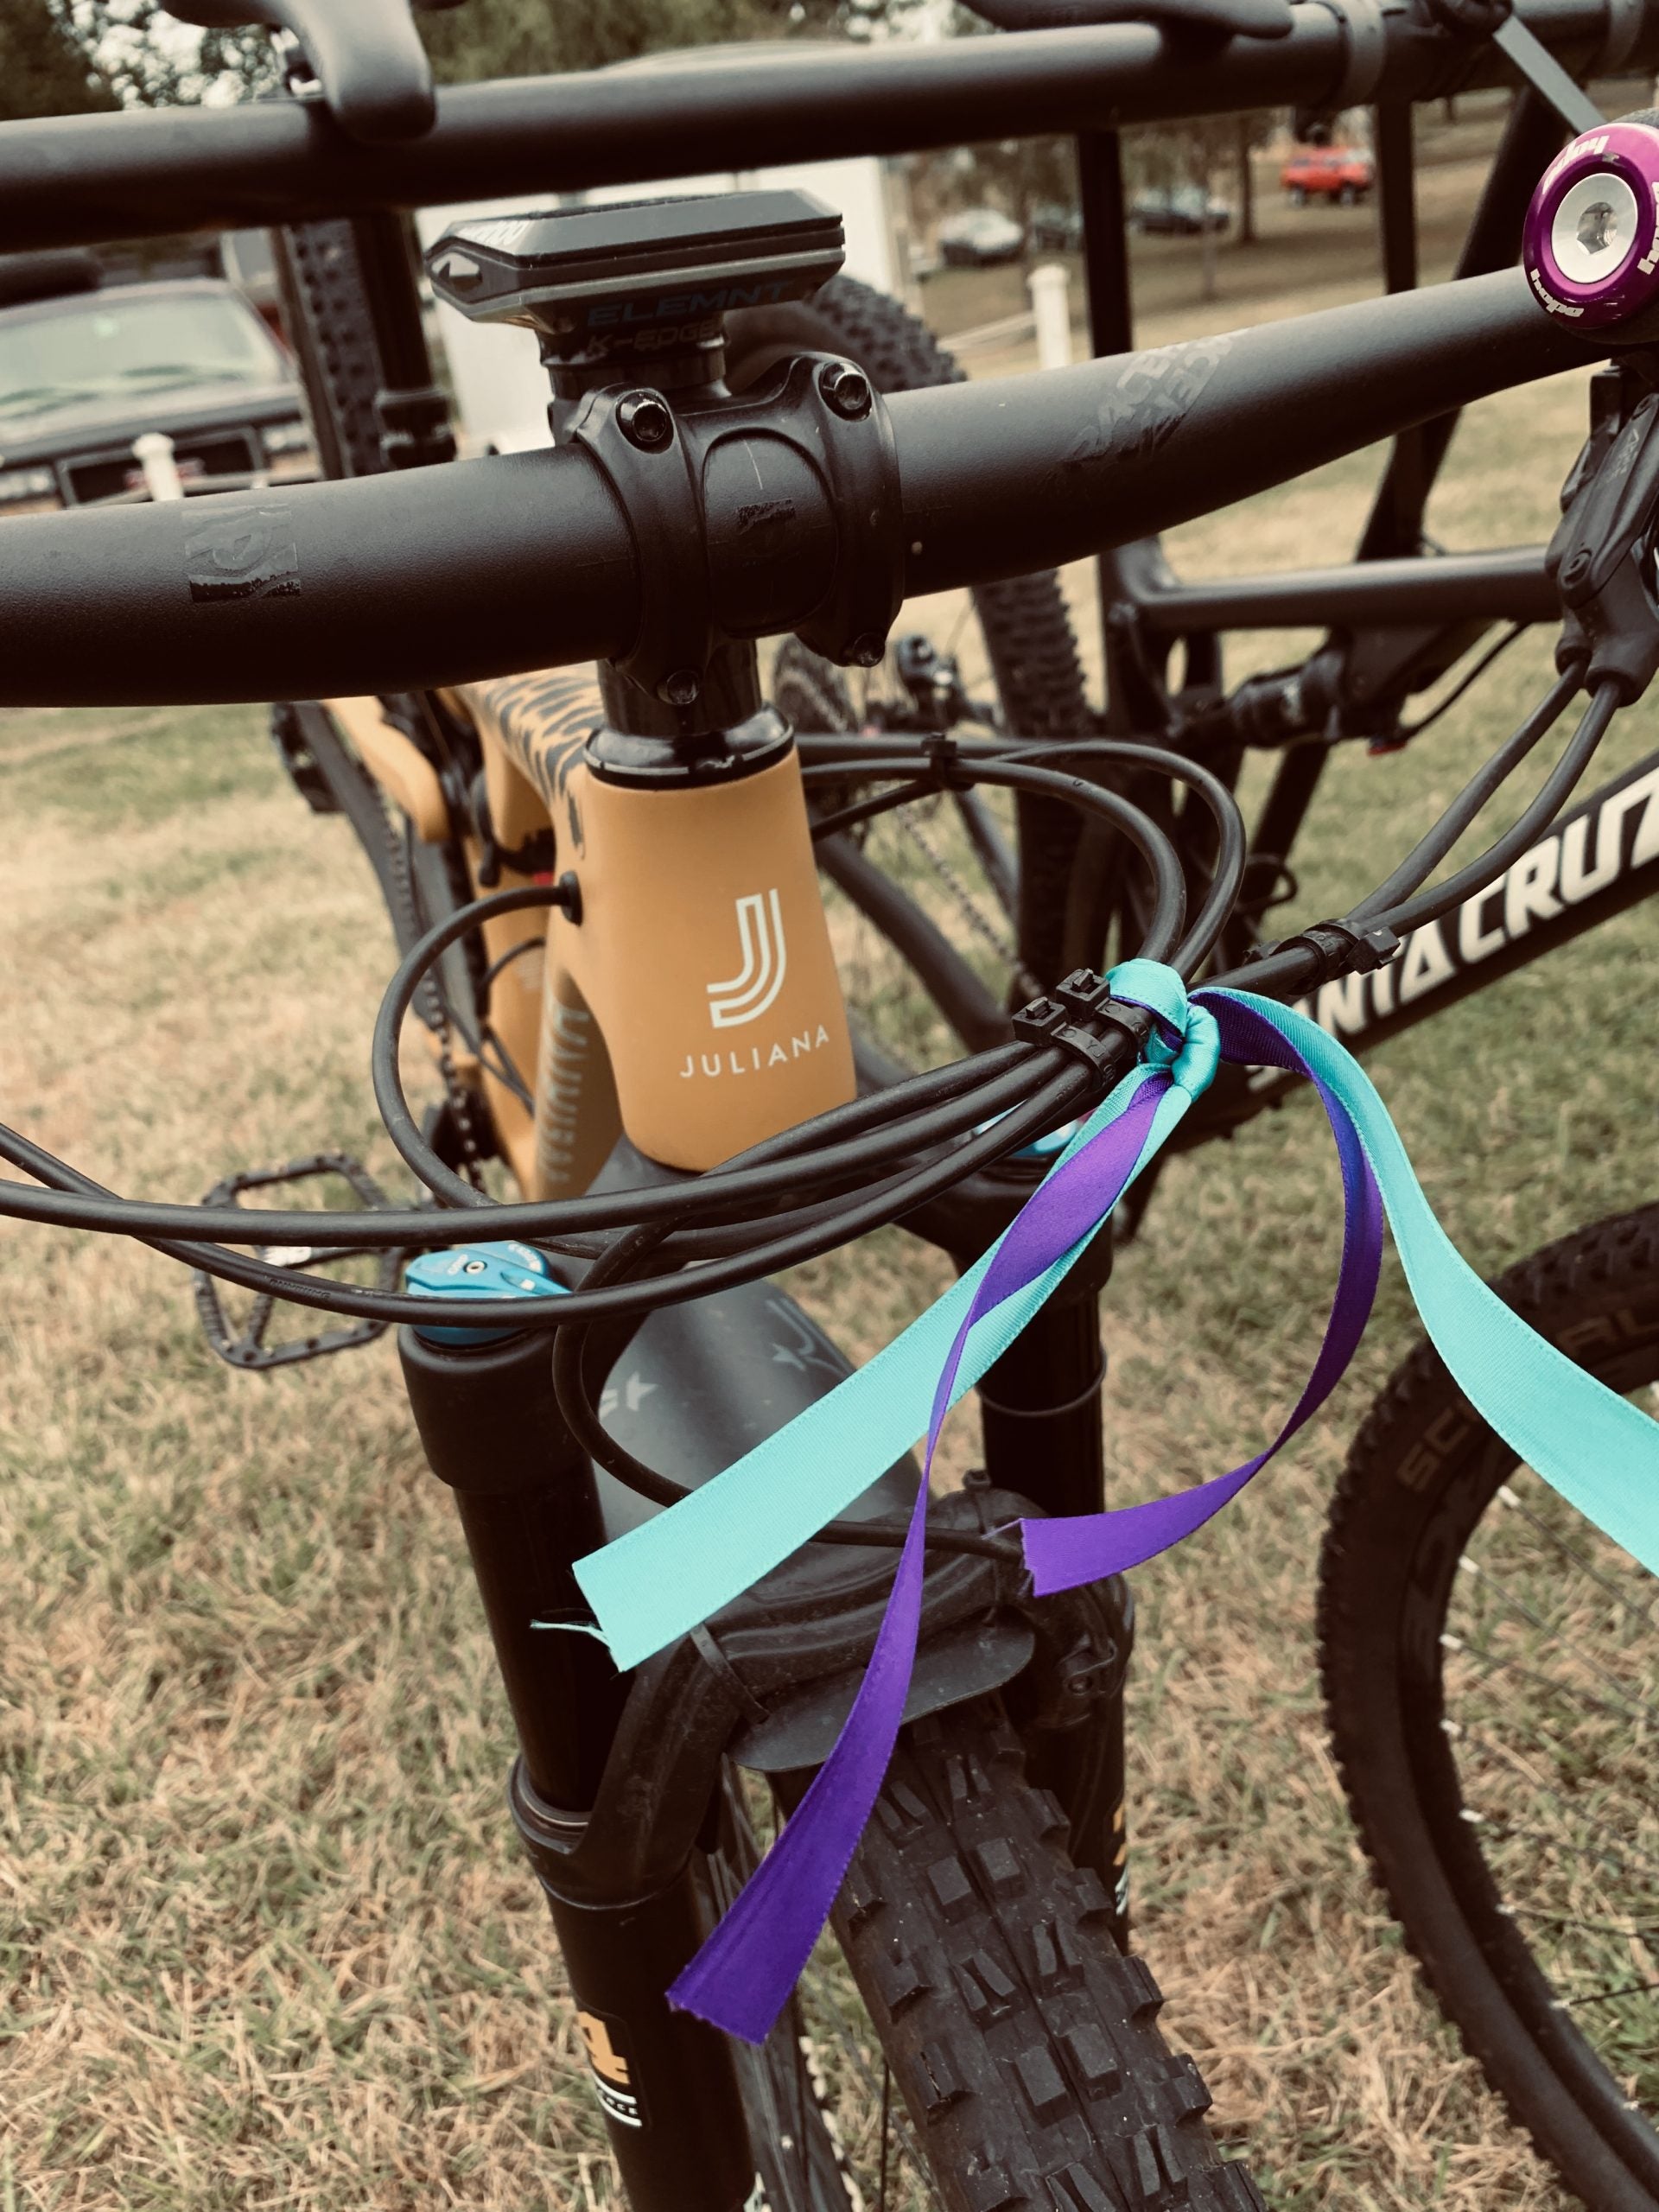 Riding For Something Greater Than Ourselves - Bike With Ribbons